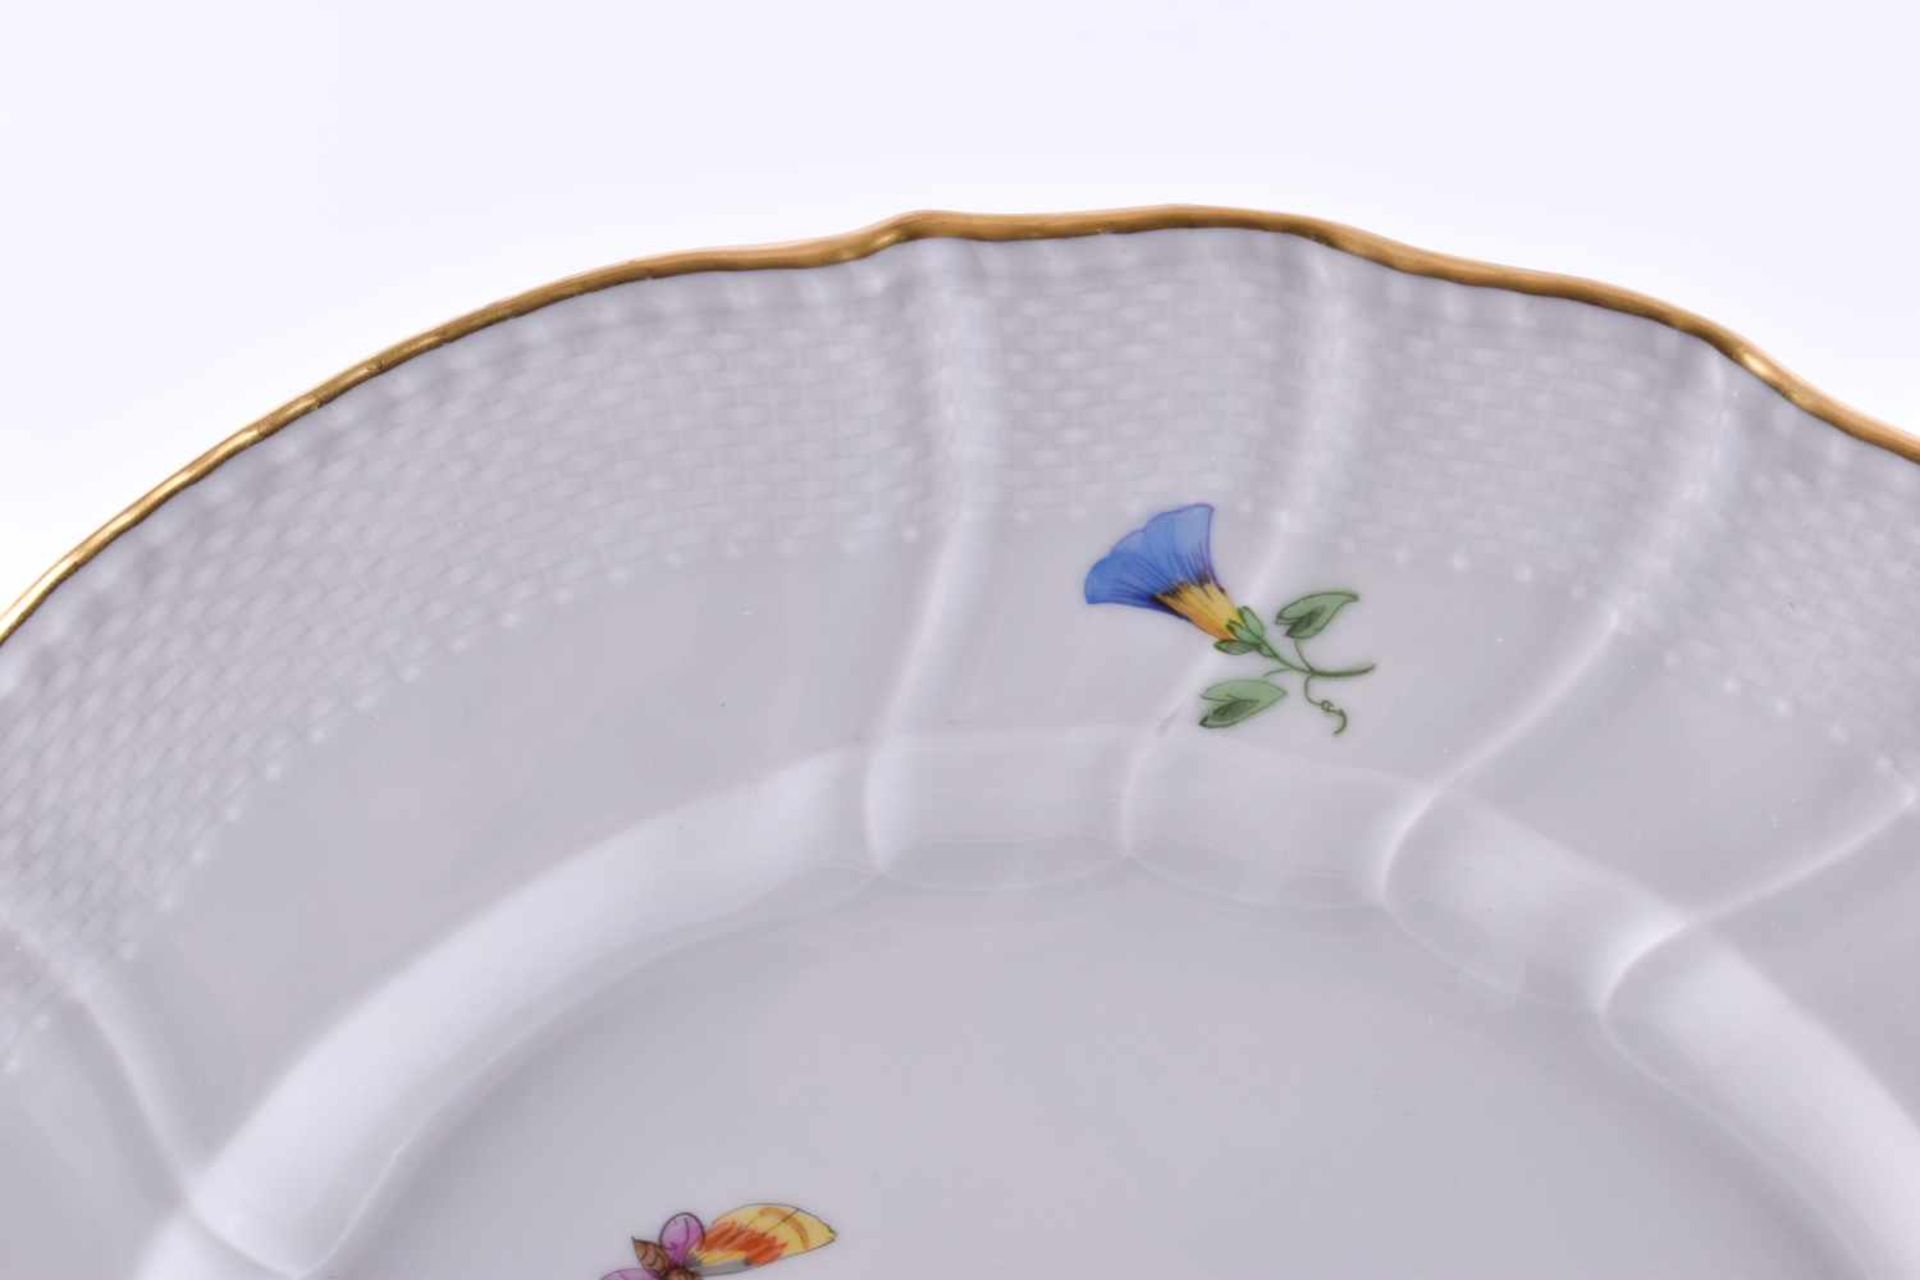 4 plates KPM Berlin 1962-1992colored and gold decorated with floral and butterfly decoration, blue - Bild 2 aus 5